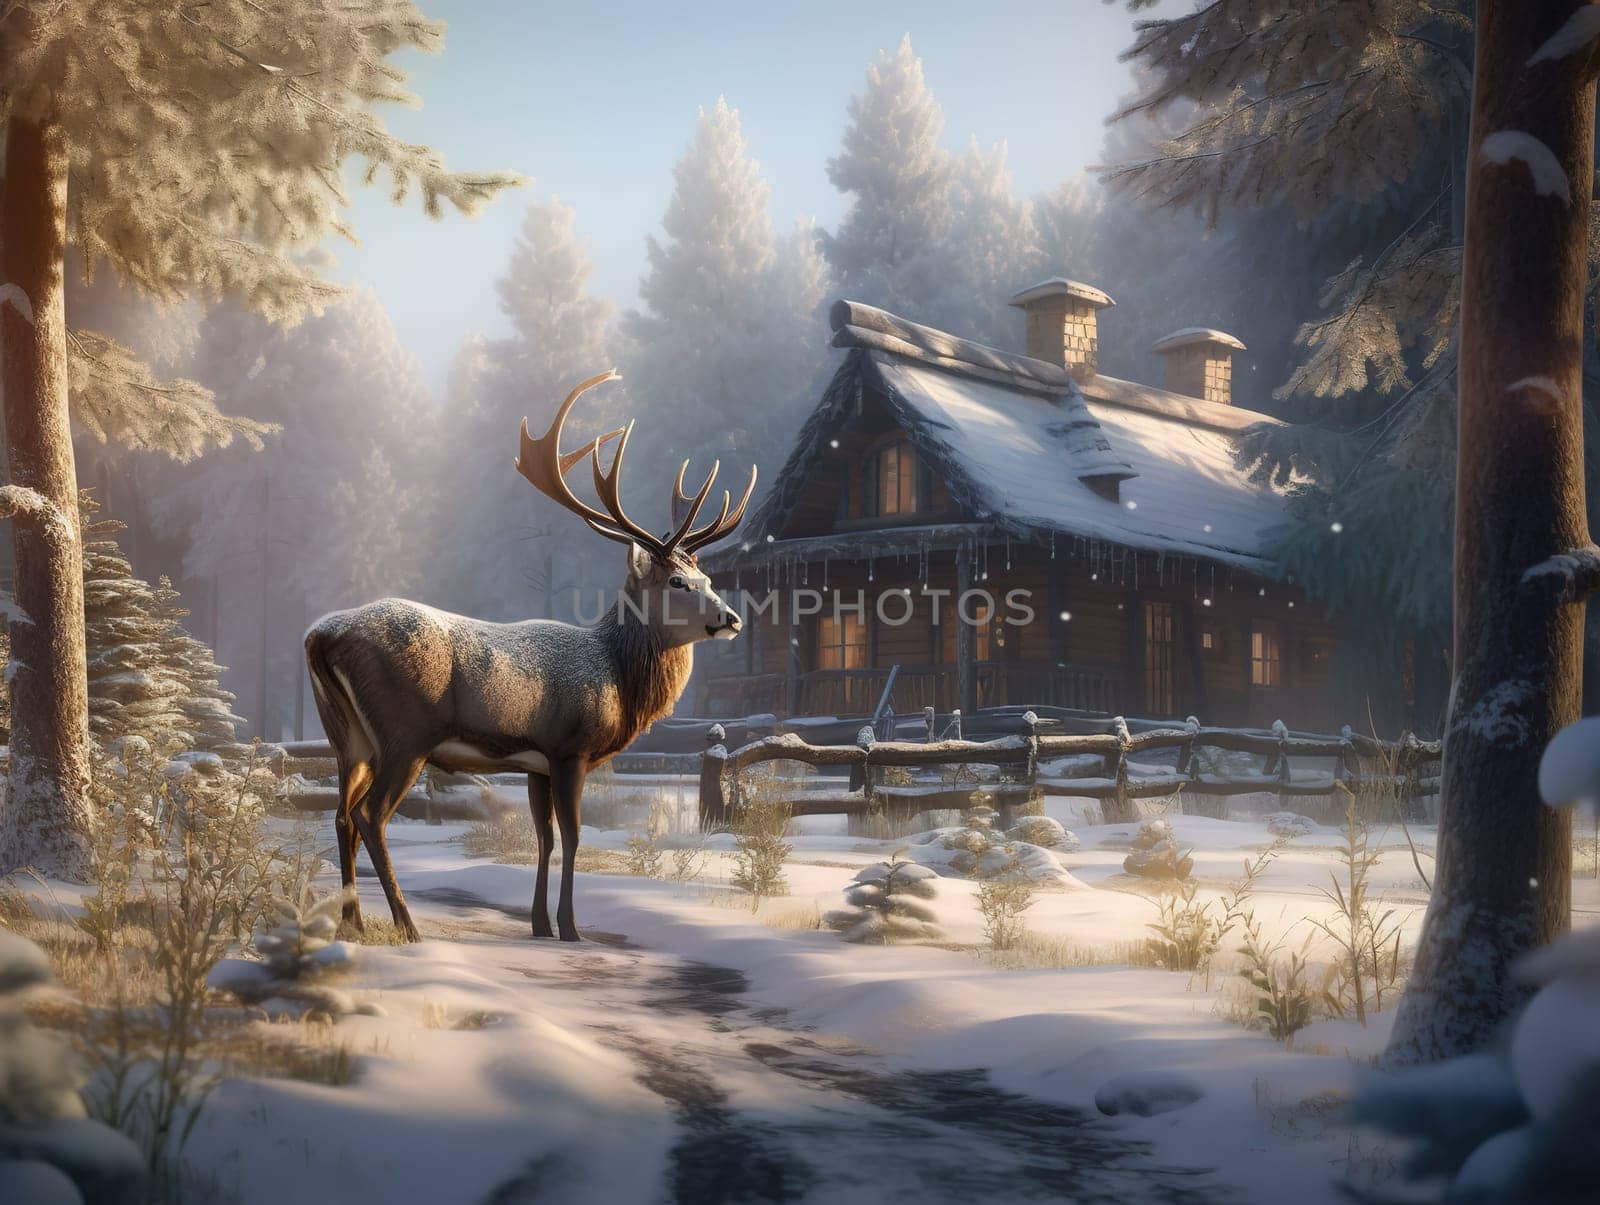 Reindeer In A Winter Forest Near A House On Christmas Is A Serene Sight by GekaSkr